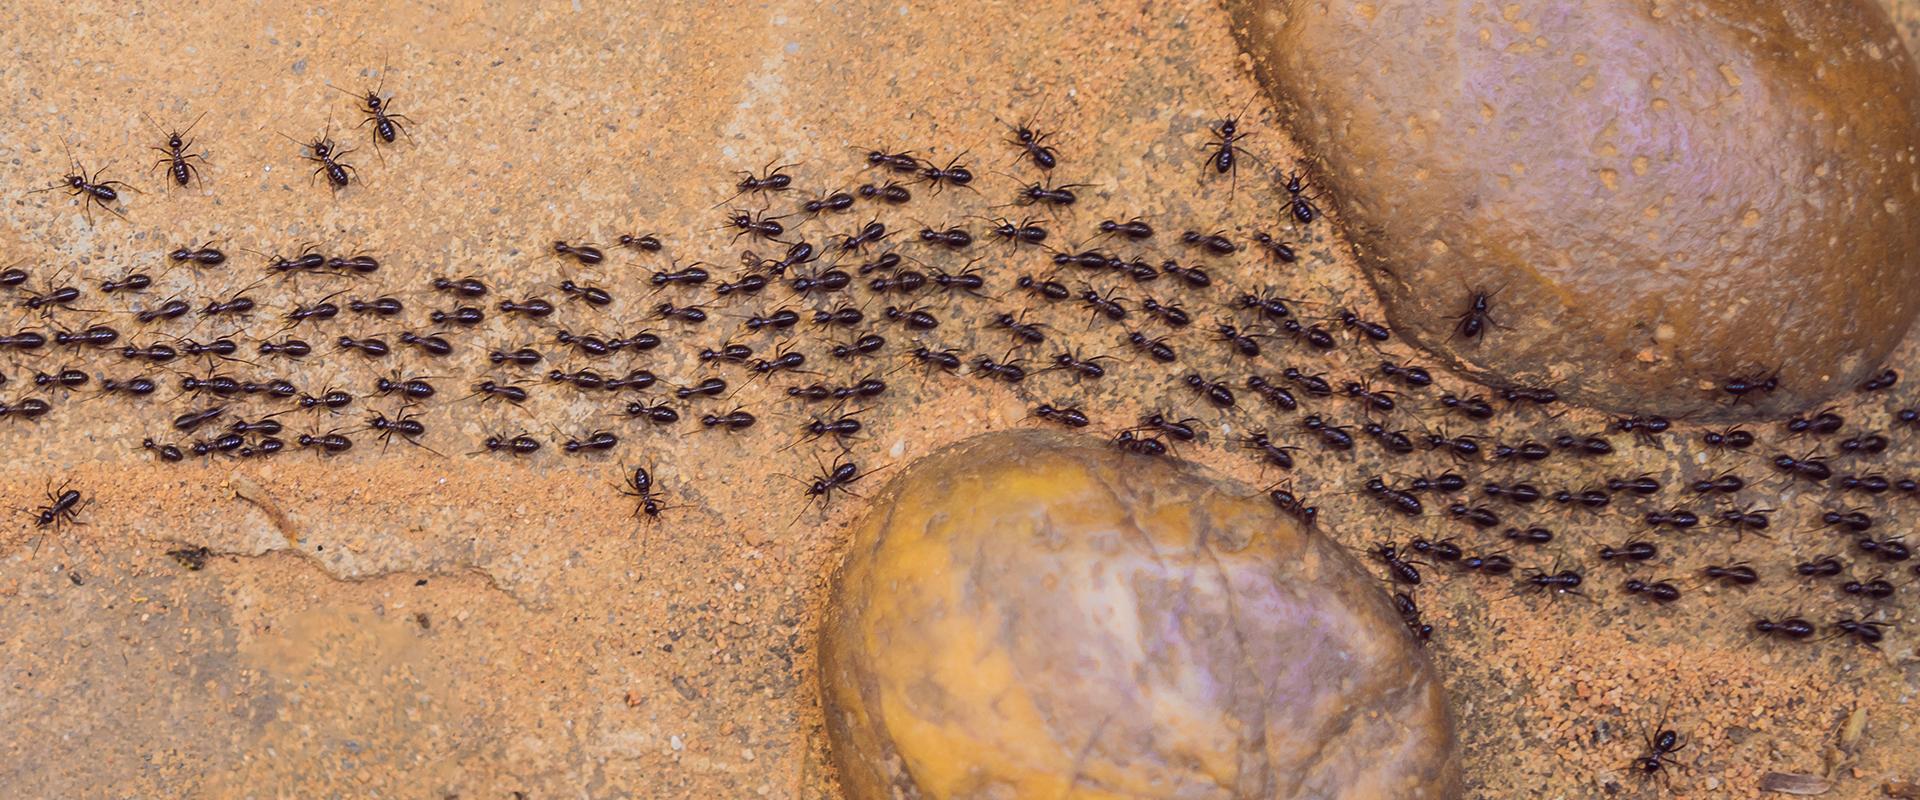 ants matching on dirt